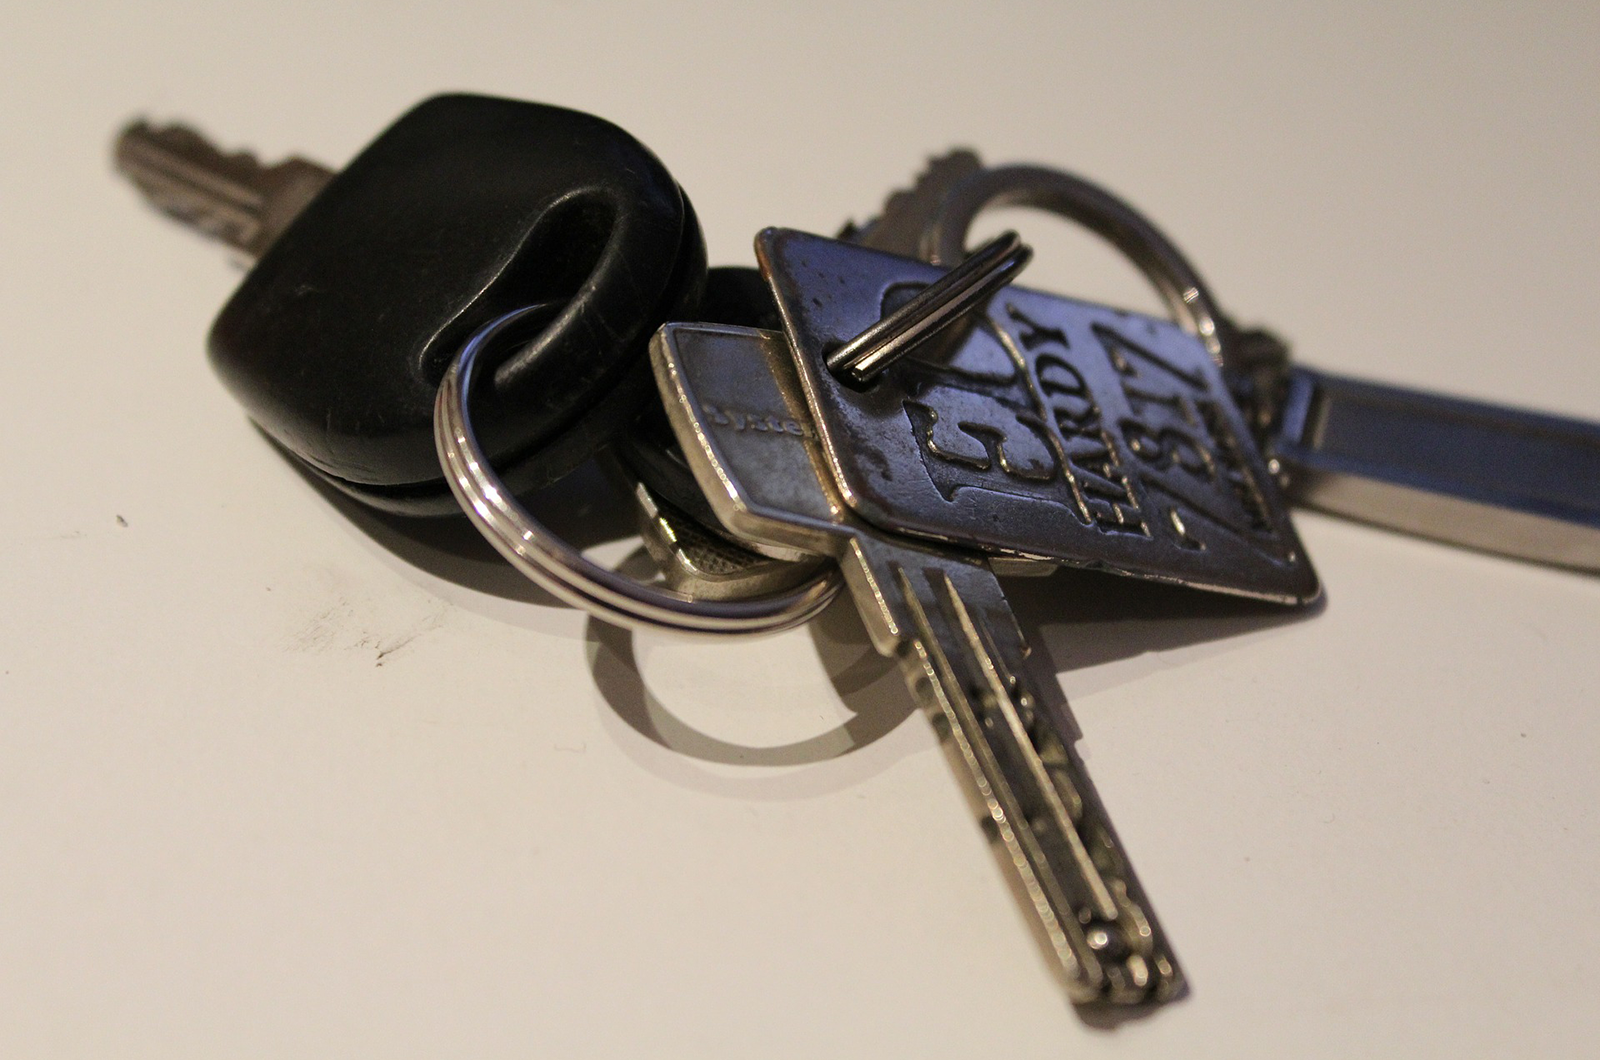 Disinfect your classic car’s keys when you get them back